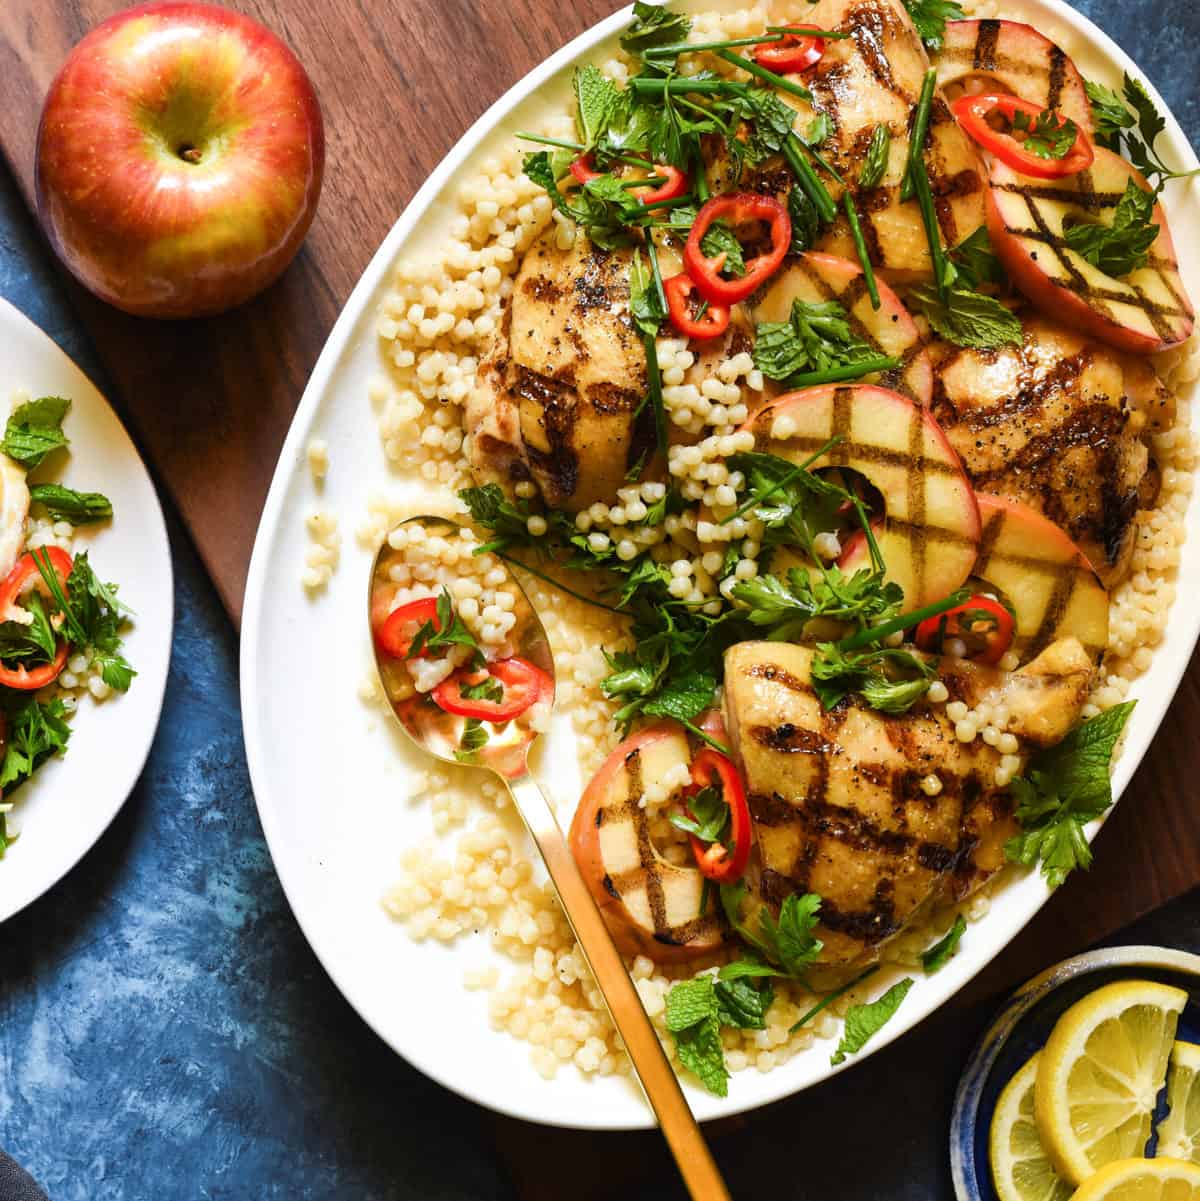 Grilled Chicken & Apples with Couscous - A beautiful, healthful grilled meal for summer or fall! | foxeslovelemons.com